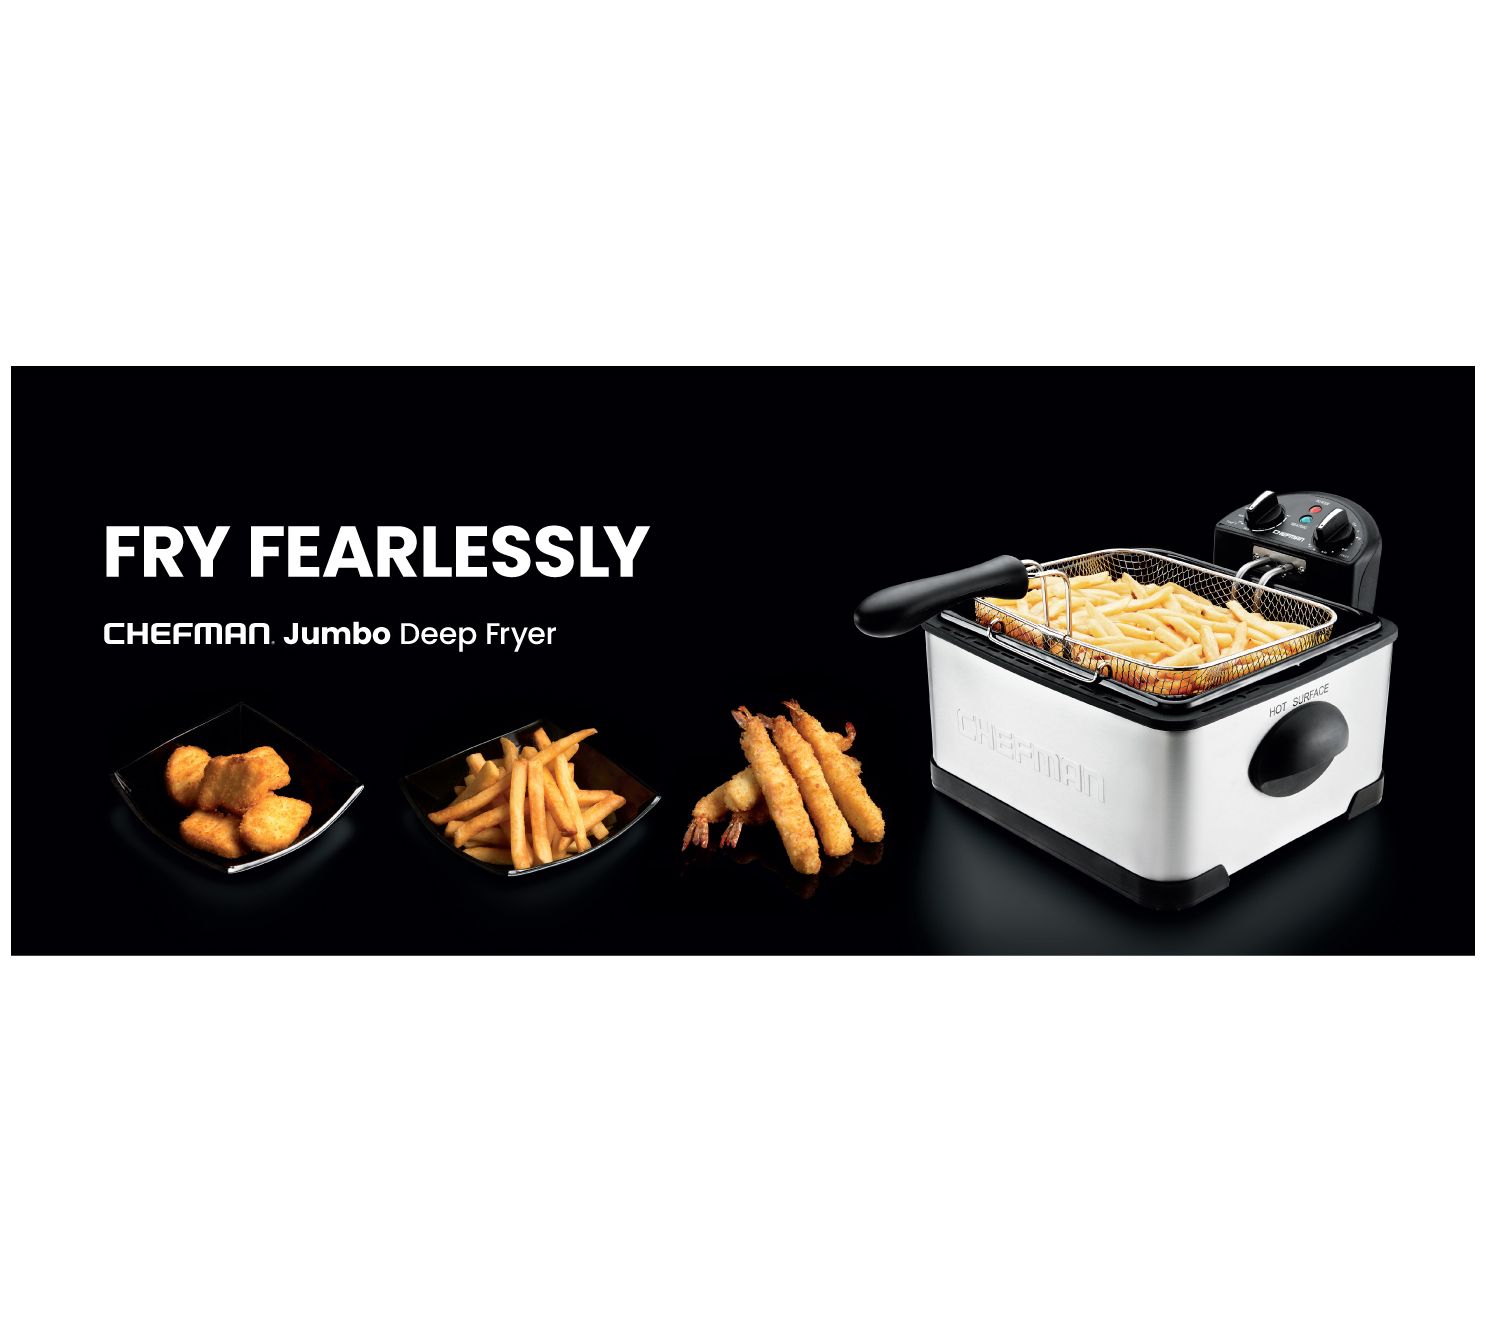 Chefman Long Stainless Steel Electric Warming Plate - Black, 1 ct - Food 4  Less